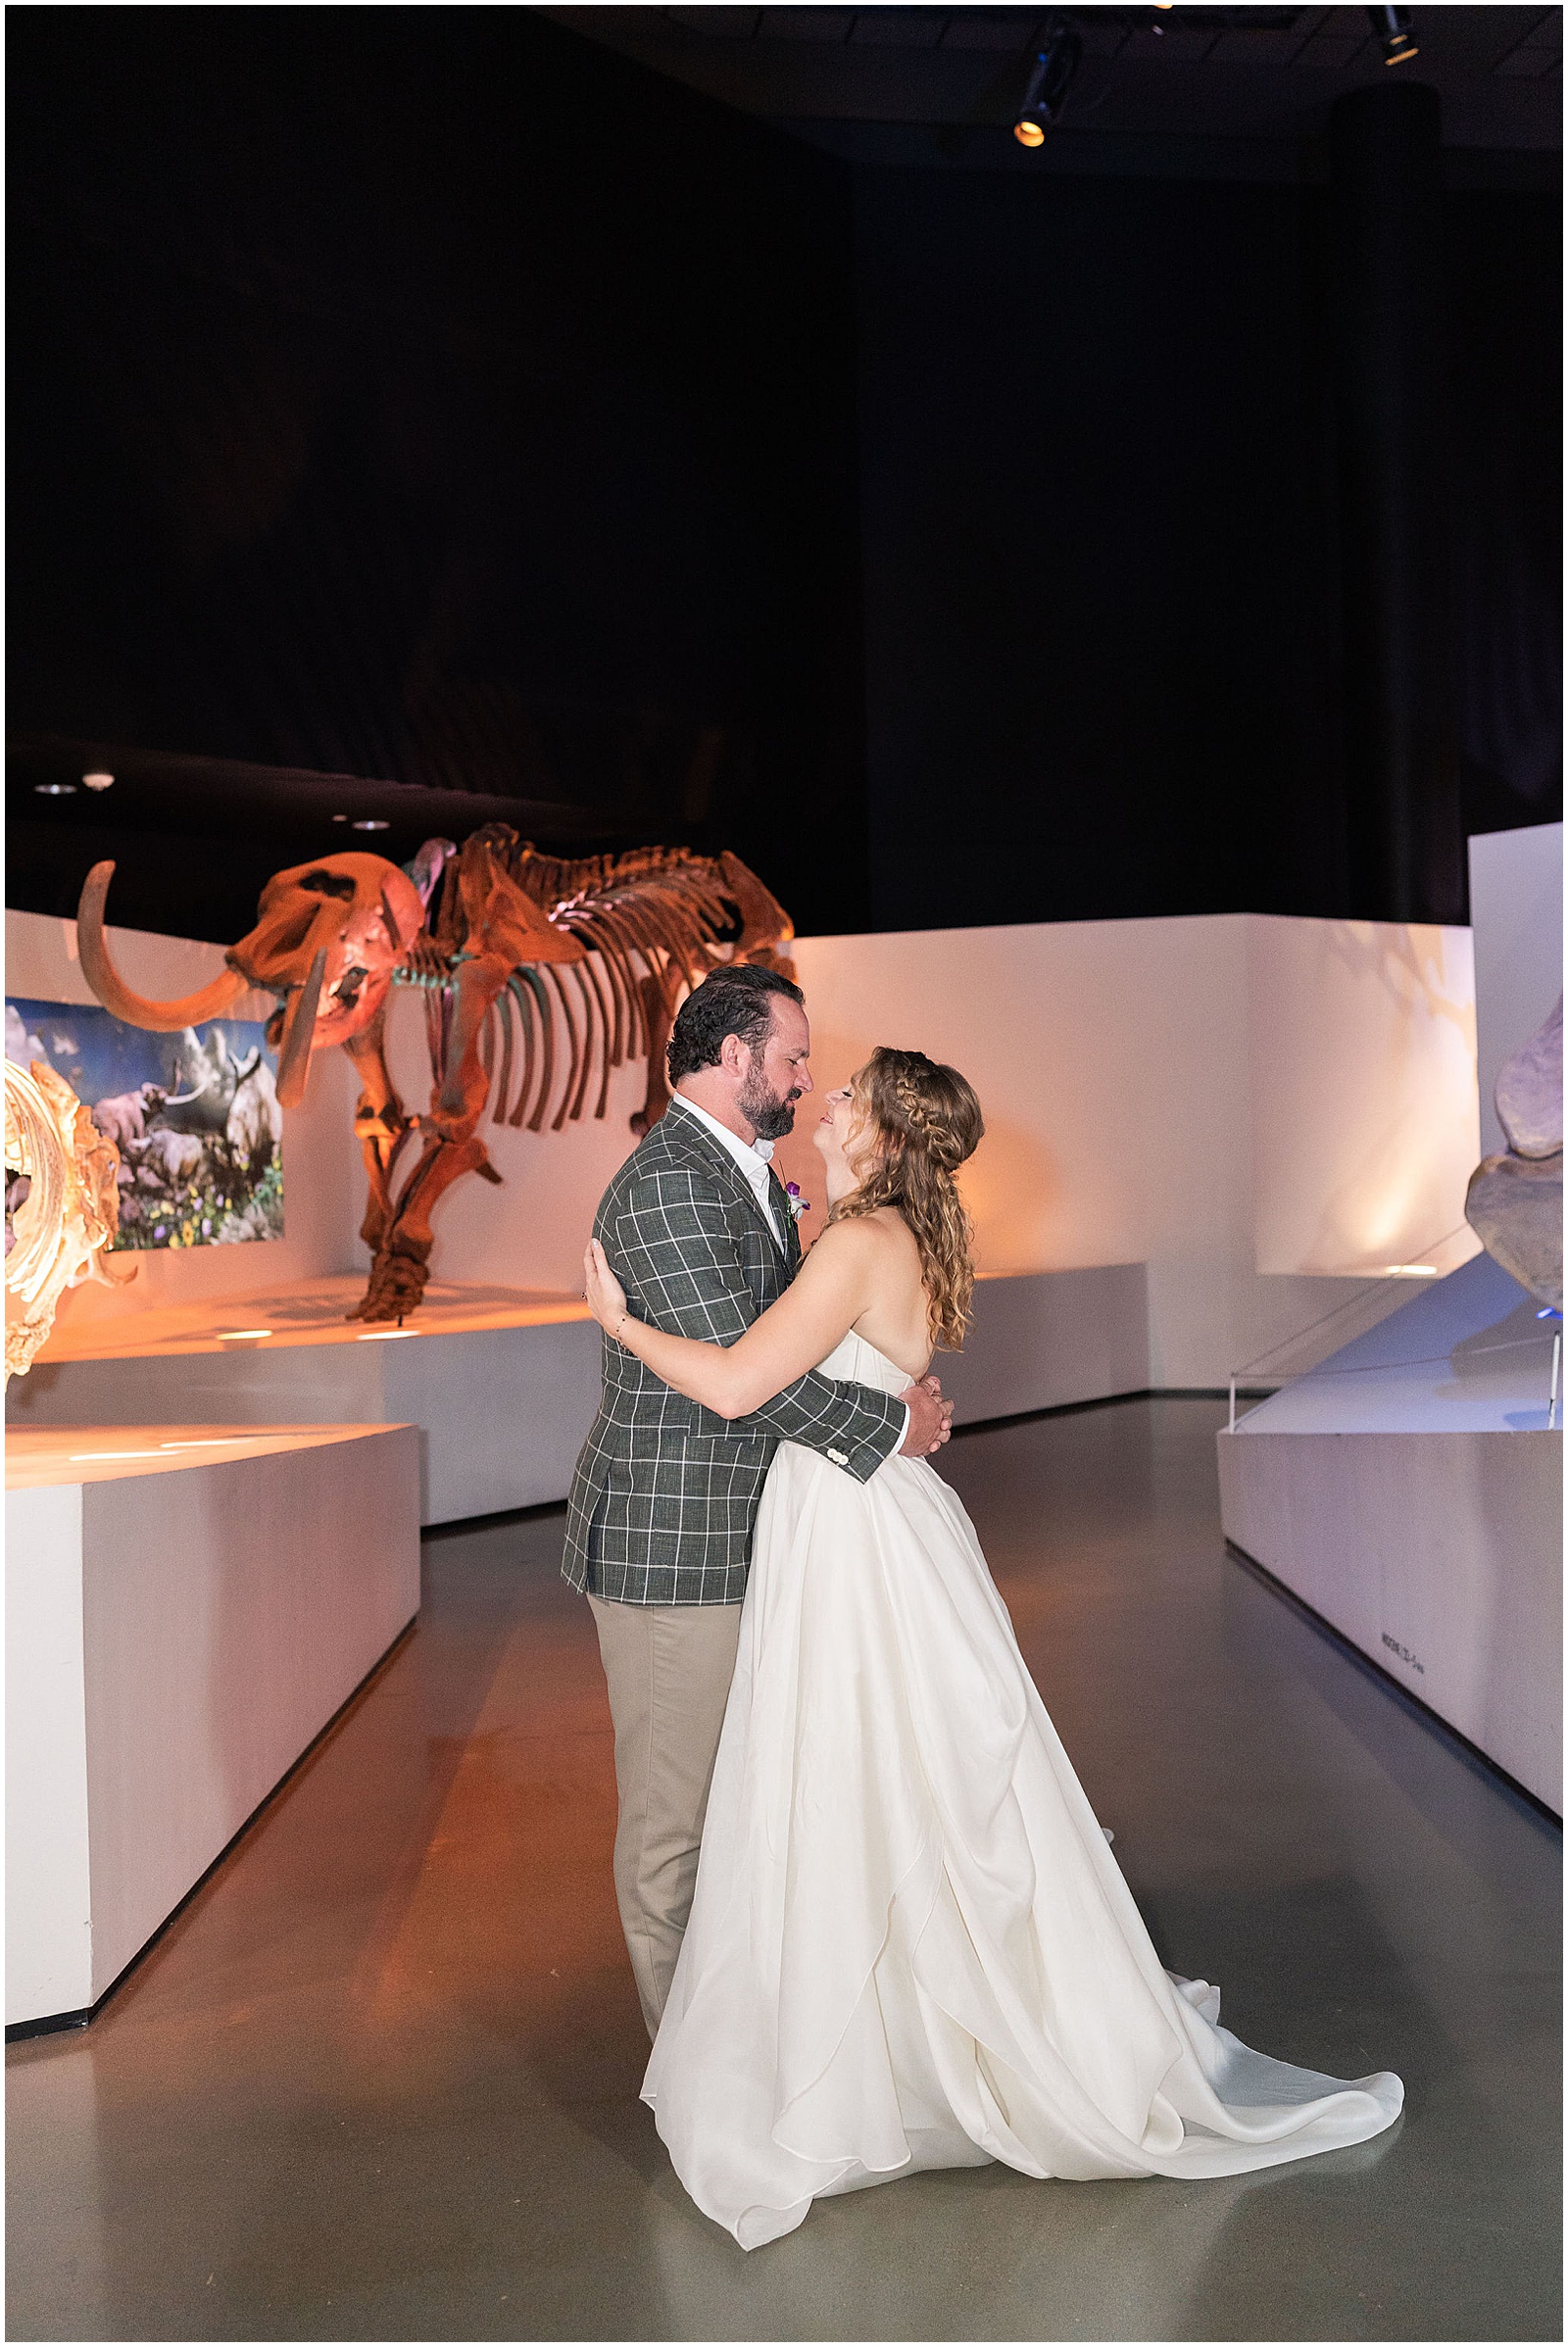 Bride and Groom photos with Dinosaurs at The Houston Museum of Natural Science | Swish and Click Photography - Houston Wedding Photographer